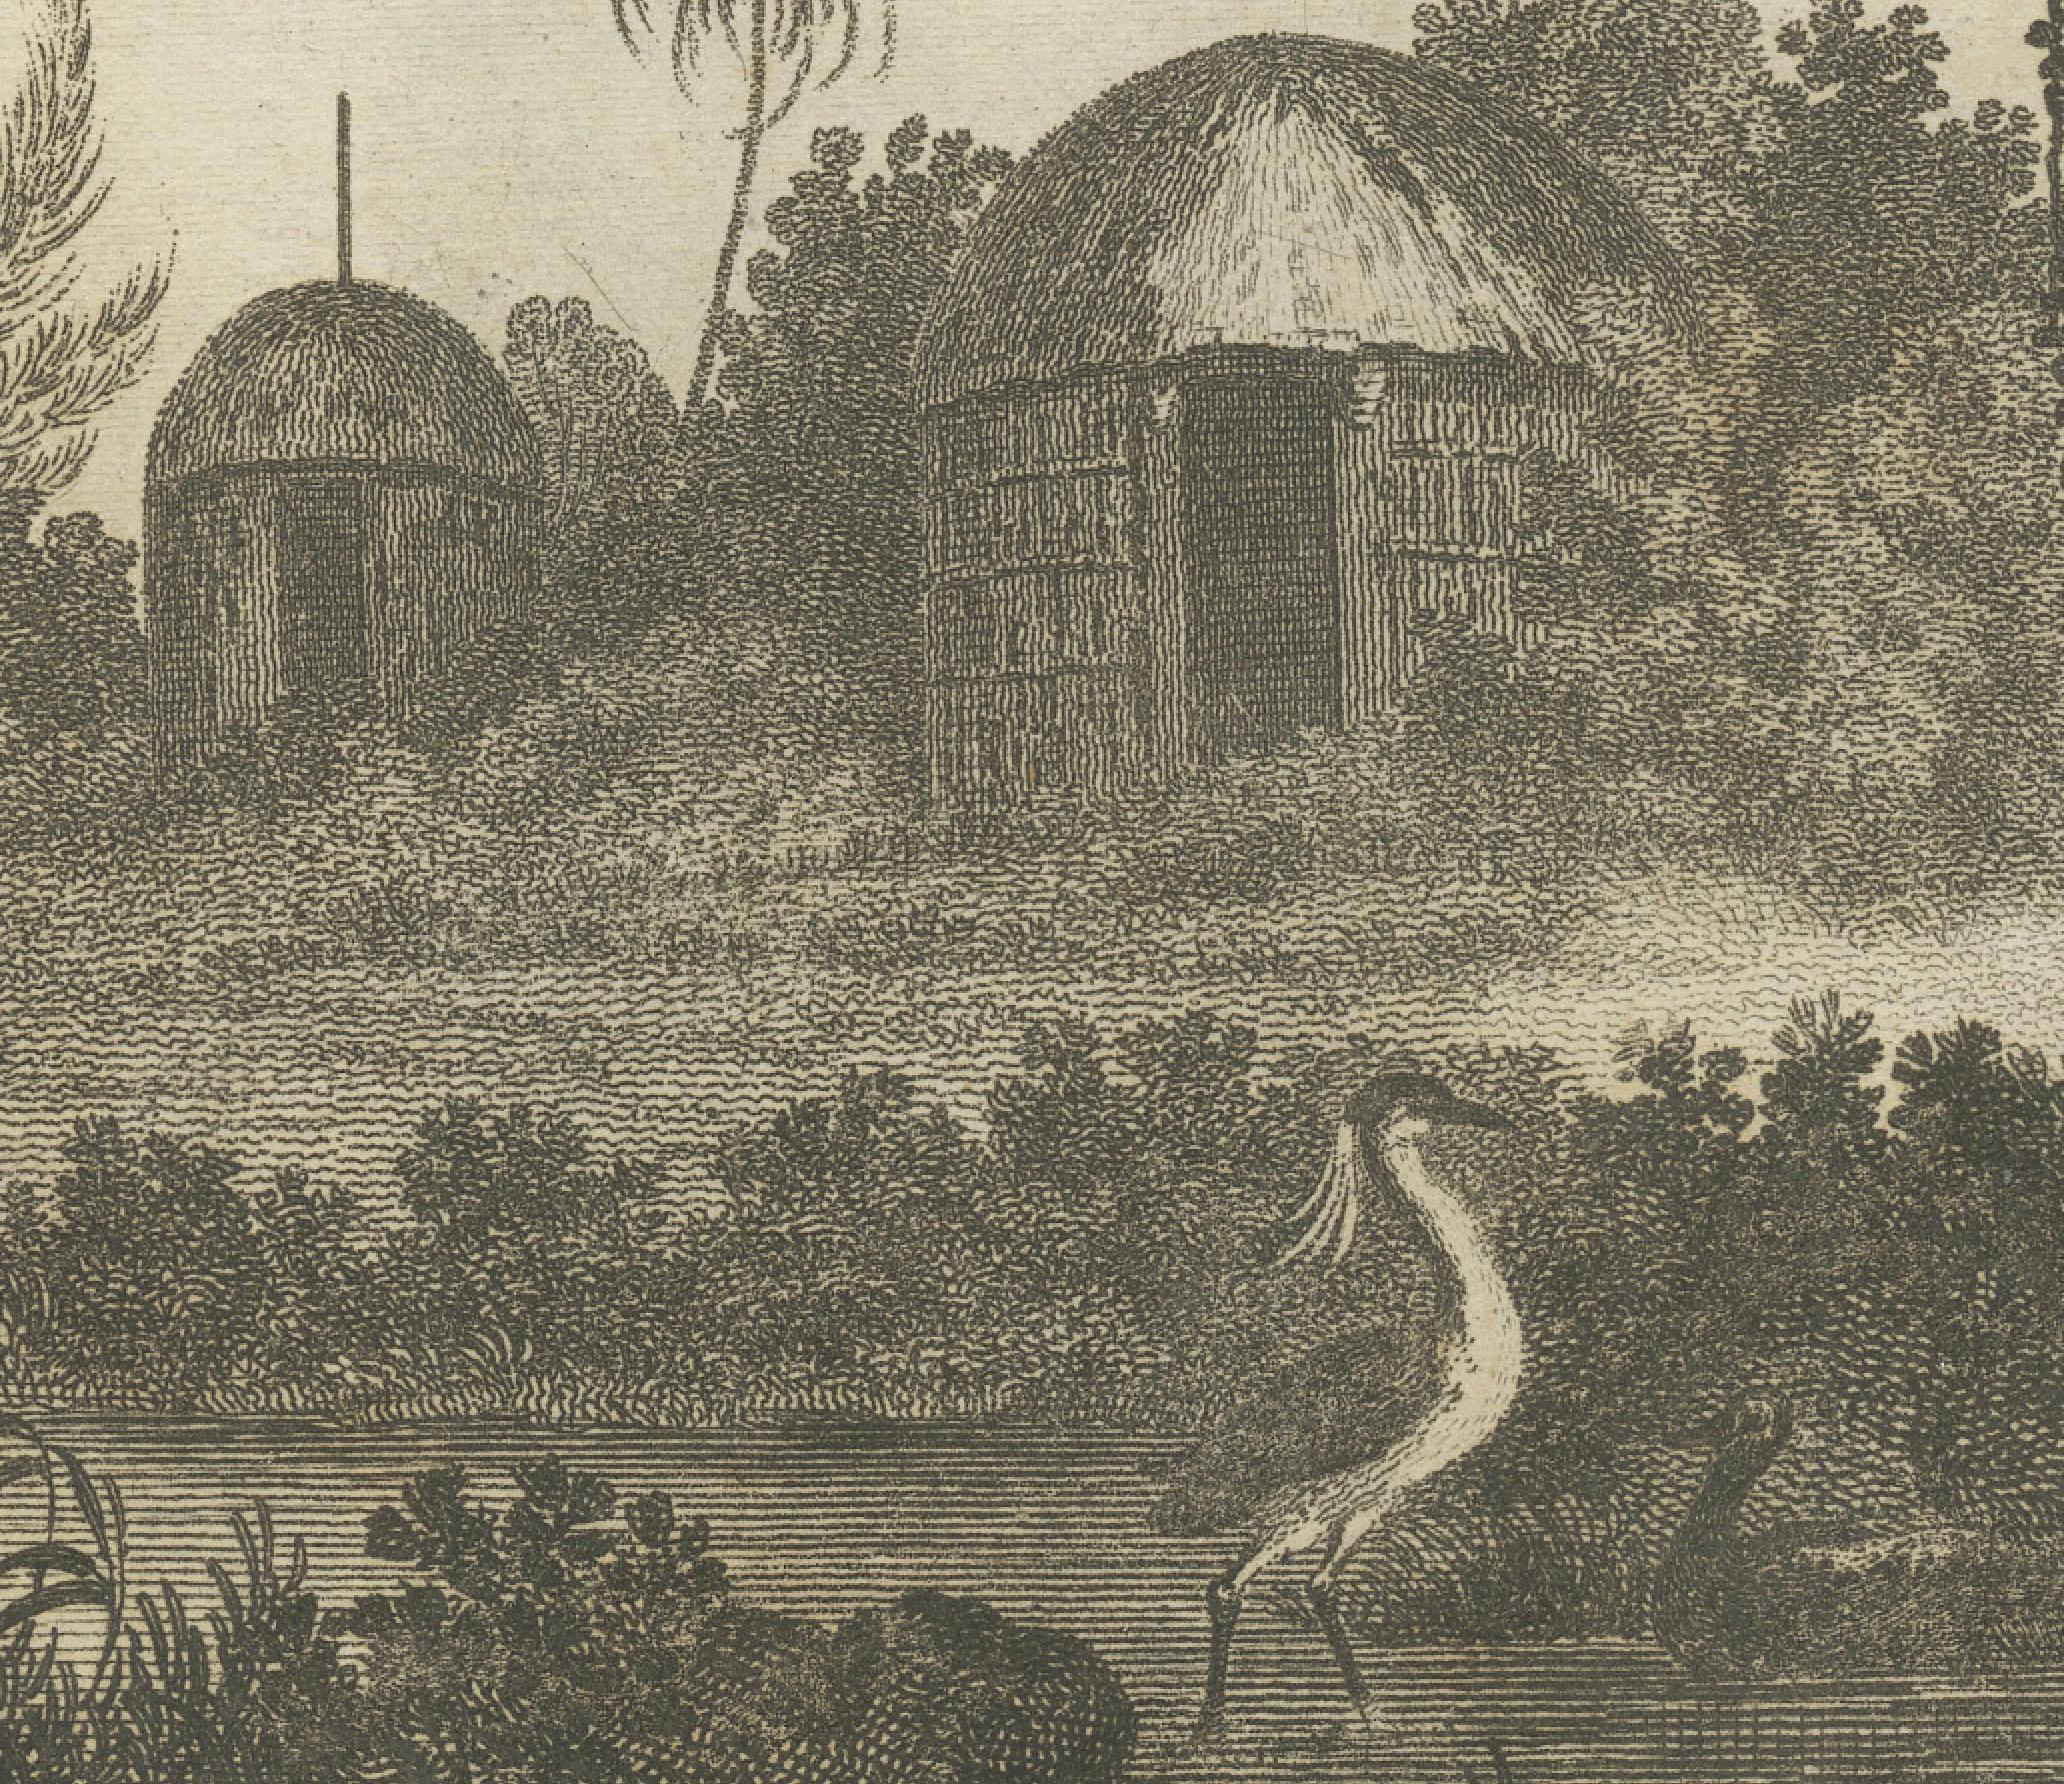 Engraved Serene Daily Life in New Caledonia: A Captured Moment from Cook's Voyages, 1784 For Sale